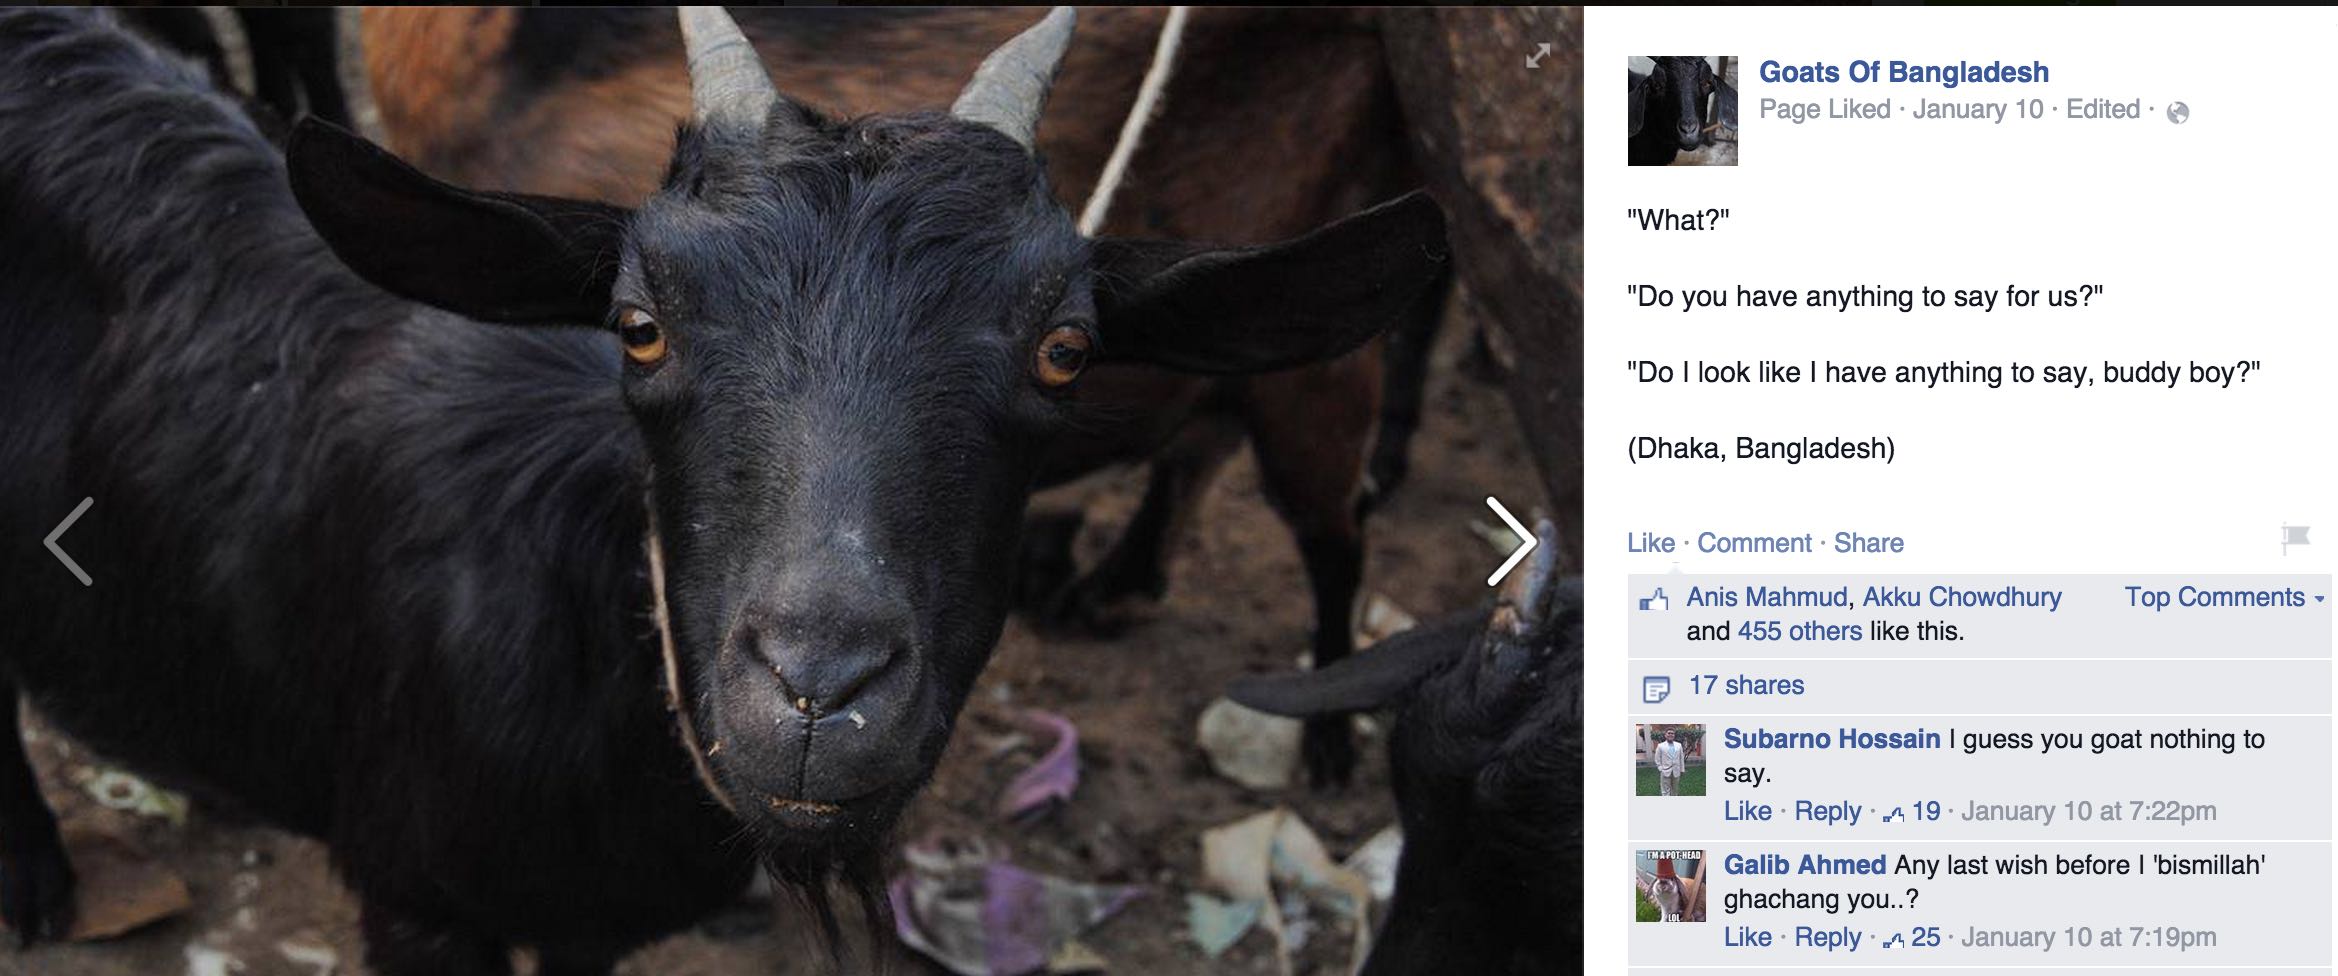 Screenshot from The Goats of Bangladesh Facebook page.